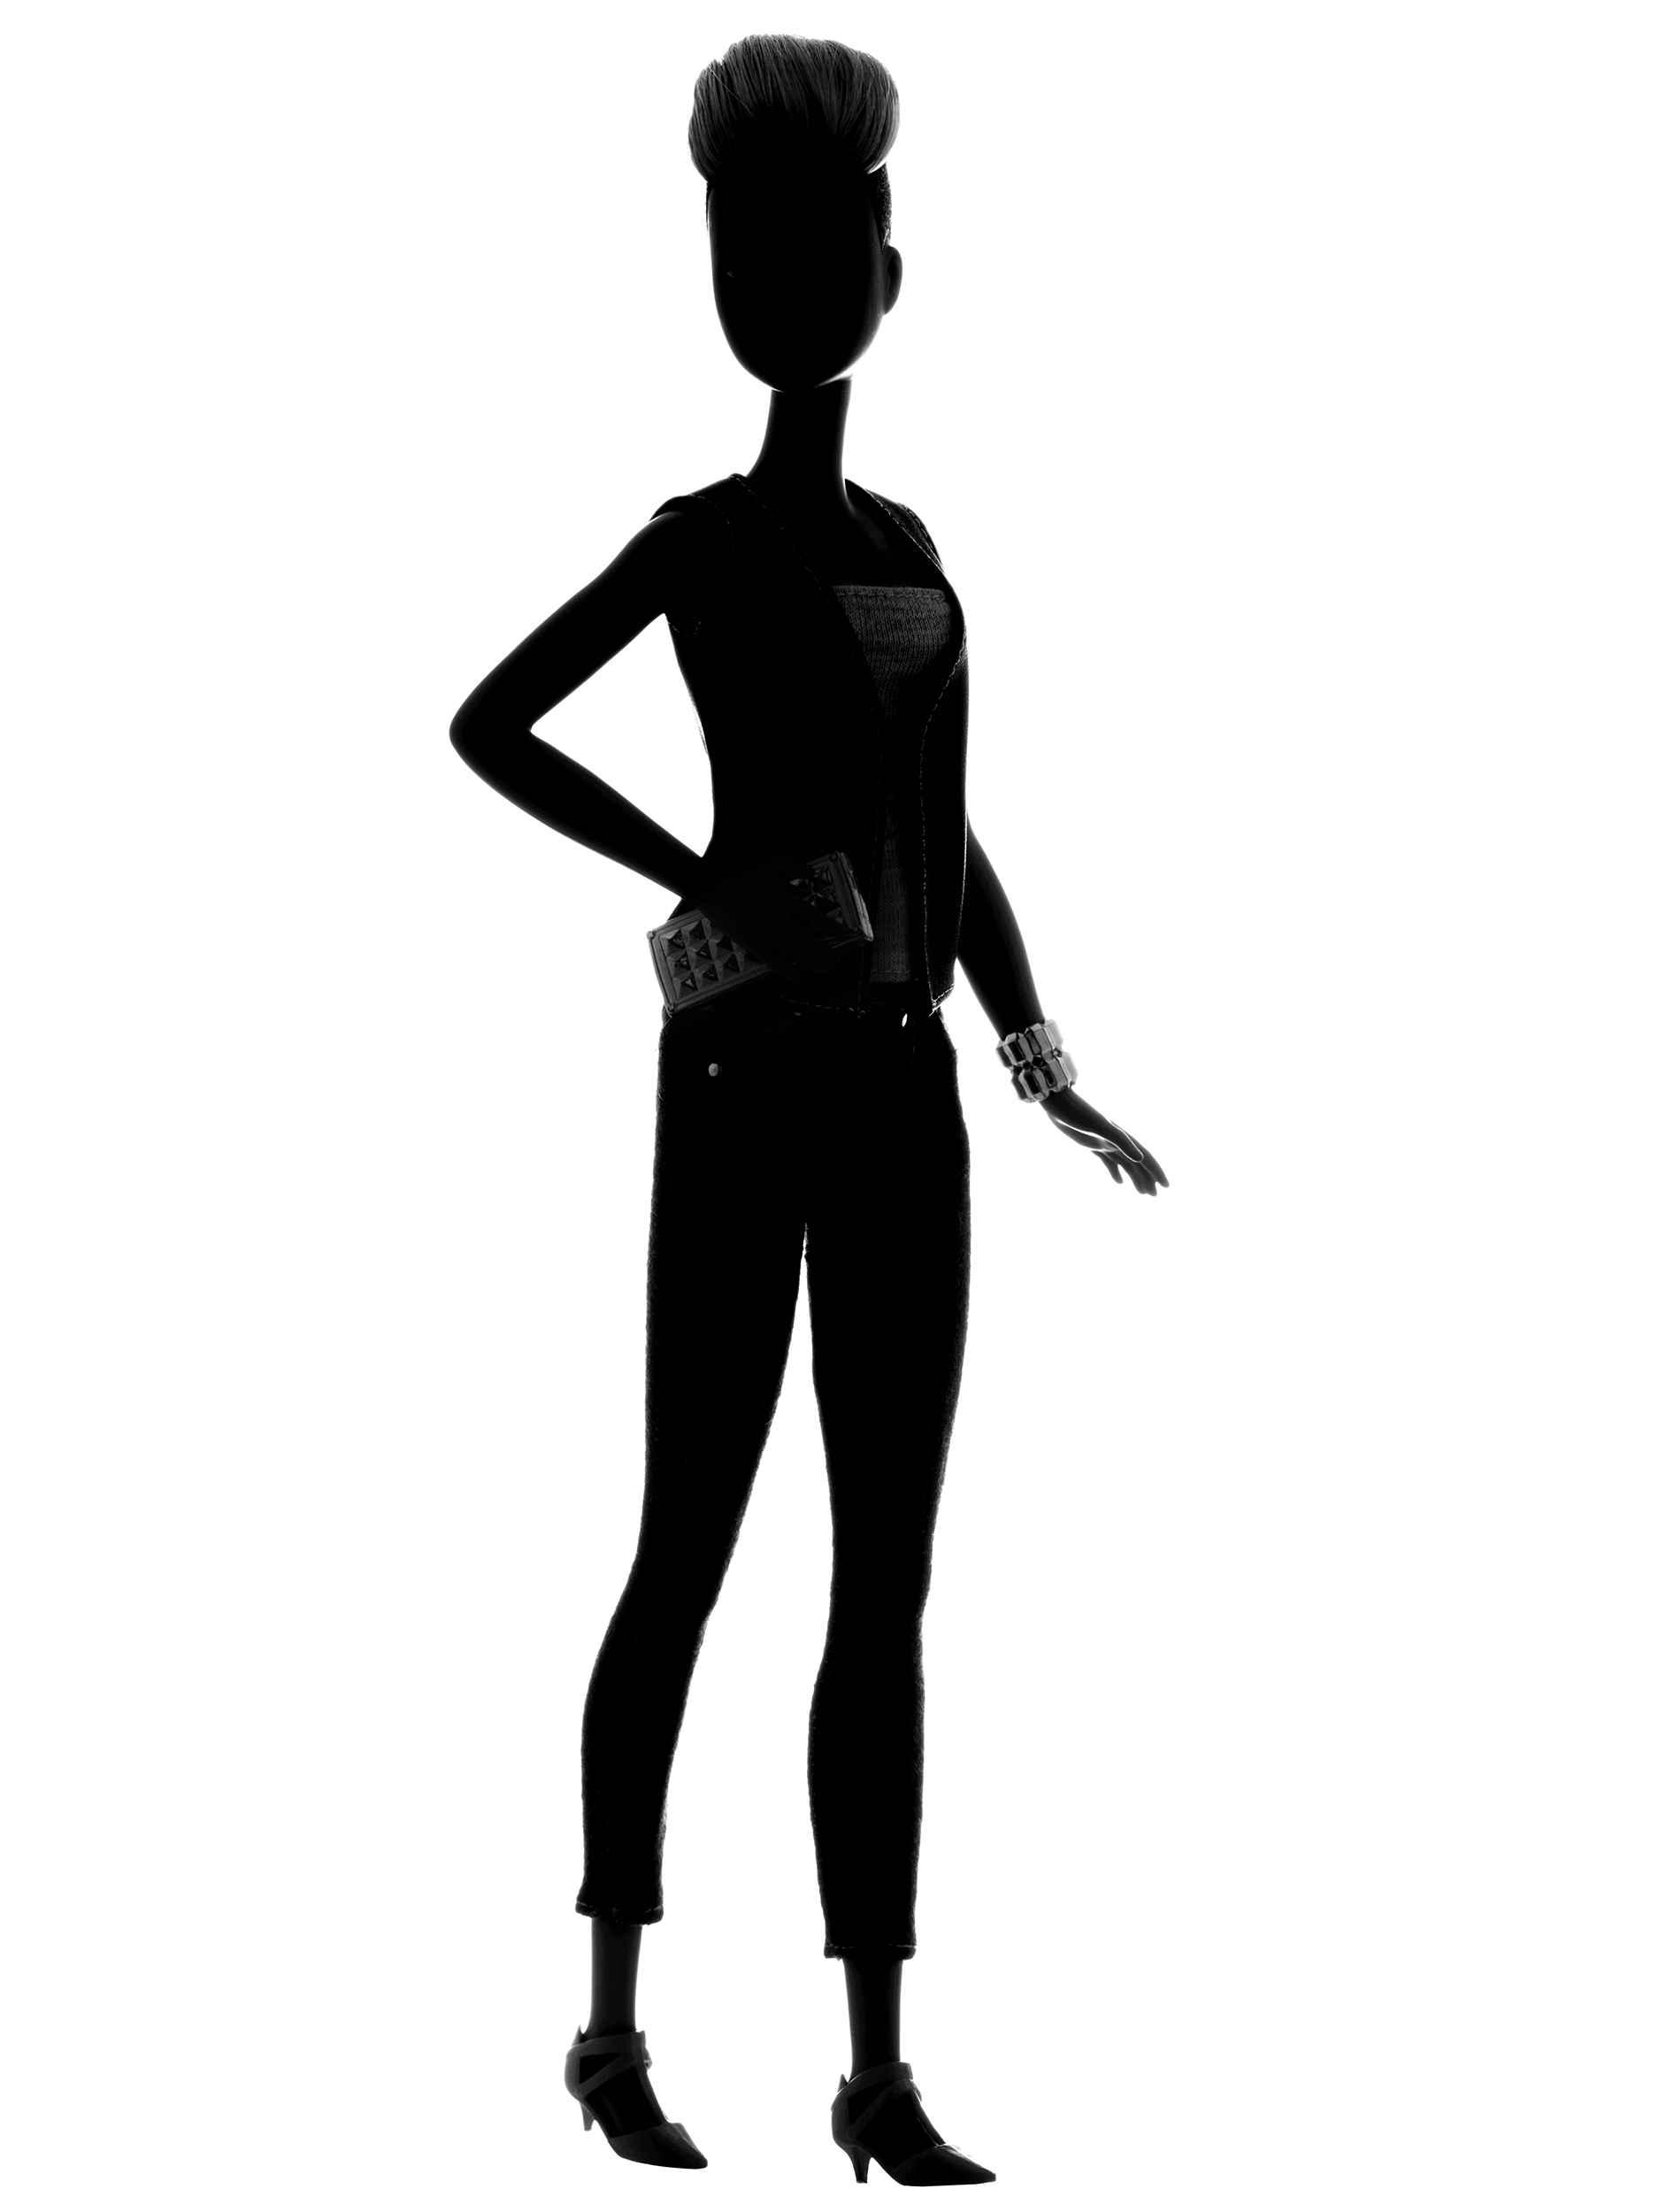 A silhouette of Mattel's new Tall Barbie